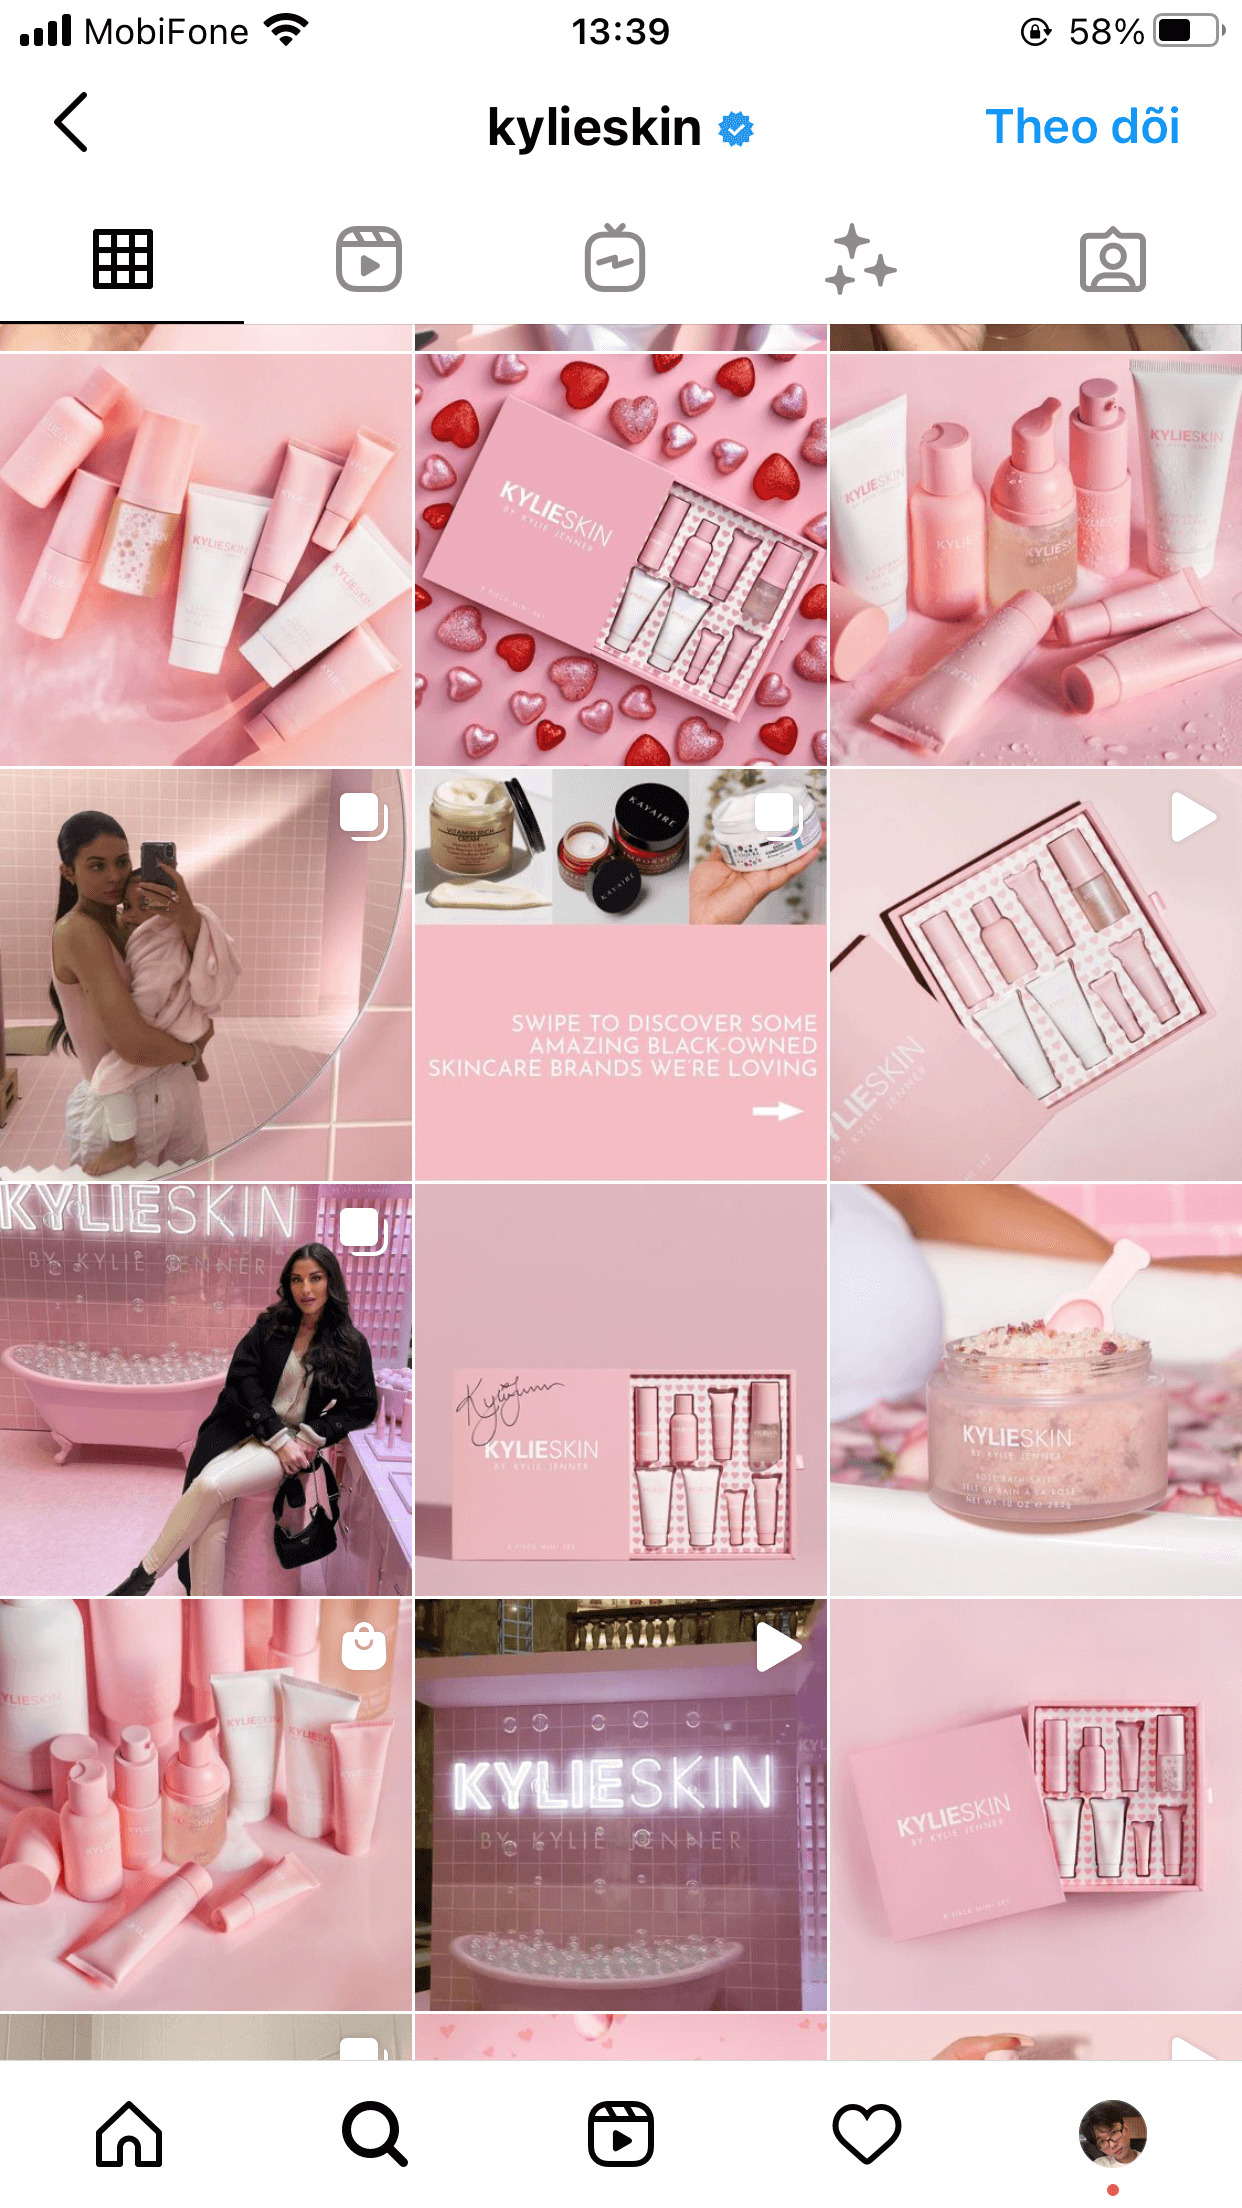 Kylieskin’s Instagram pink feed gives a sense of sweetness and luxury at the same time